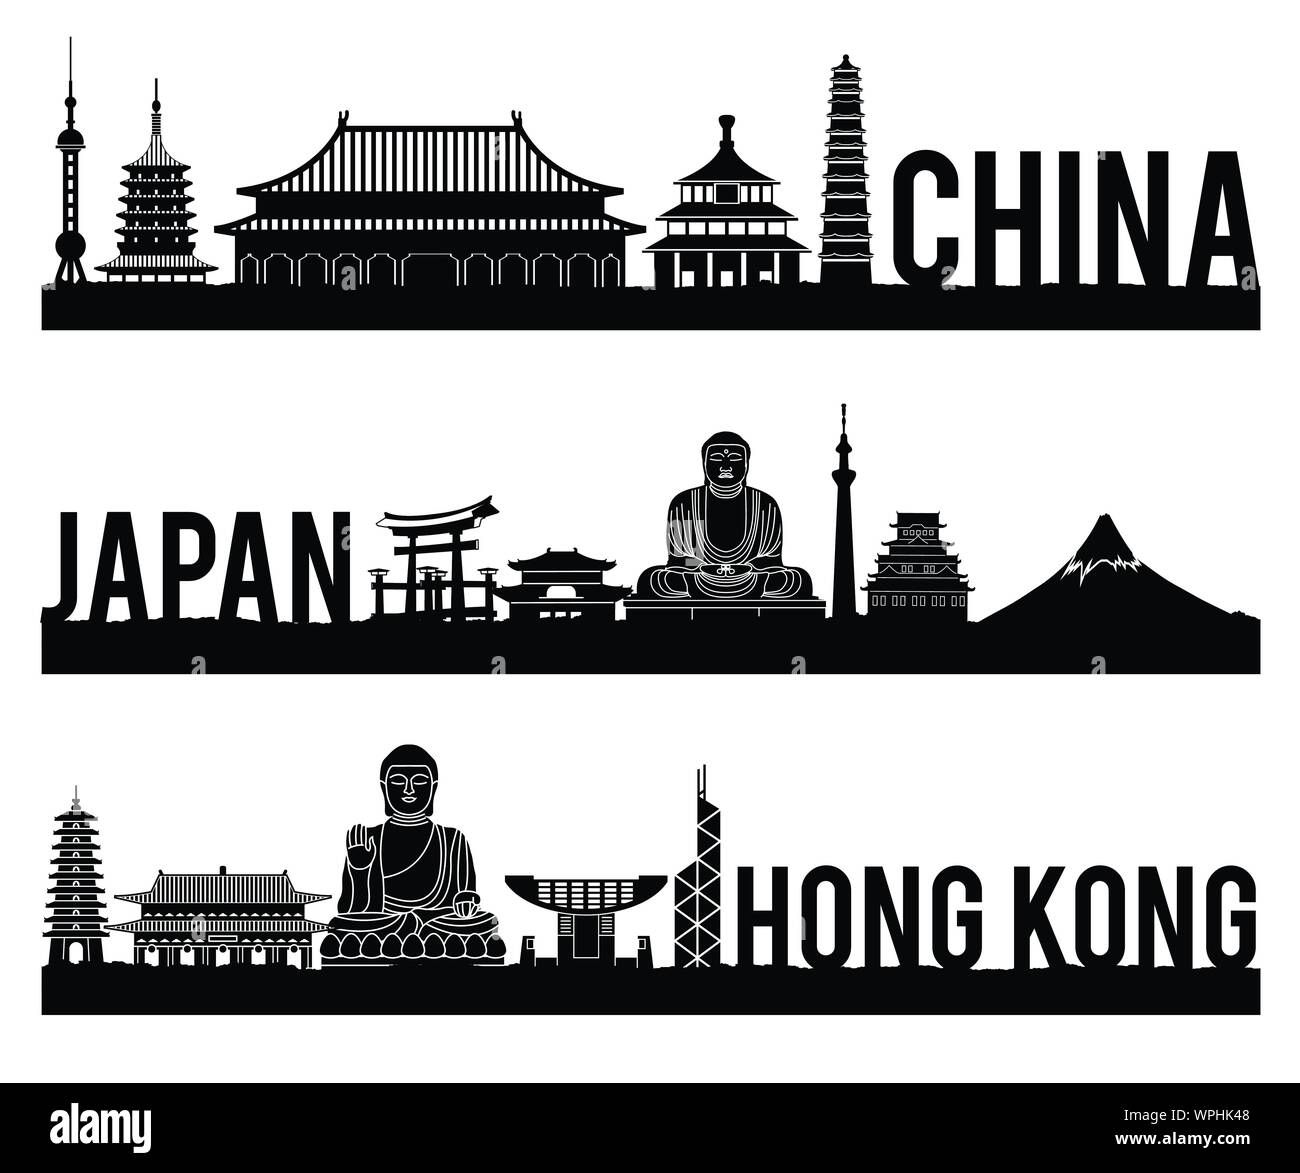 China Japan Hong Kong famous landmark silhouette style with black and white classic color design include by country name,vector illustration Stock Vector